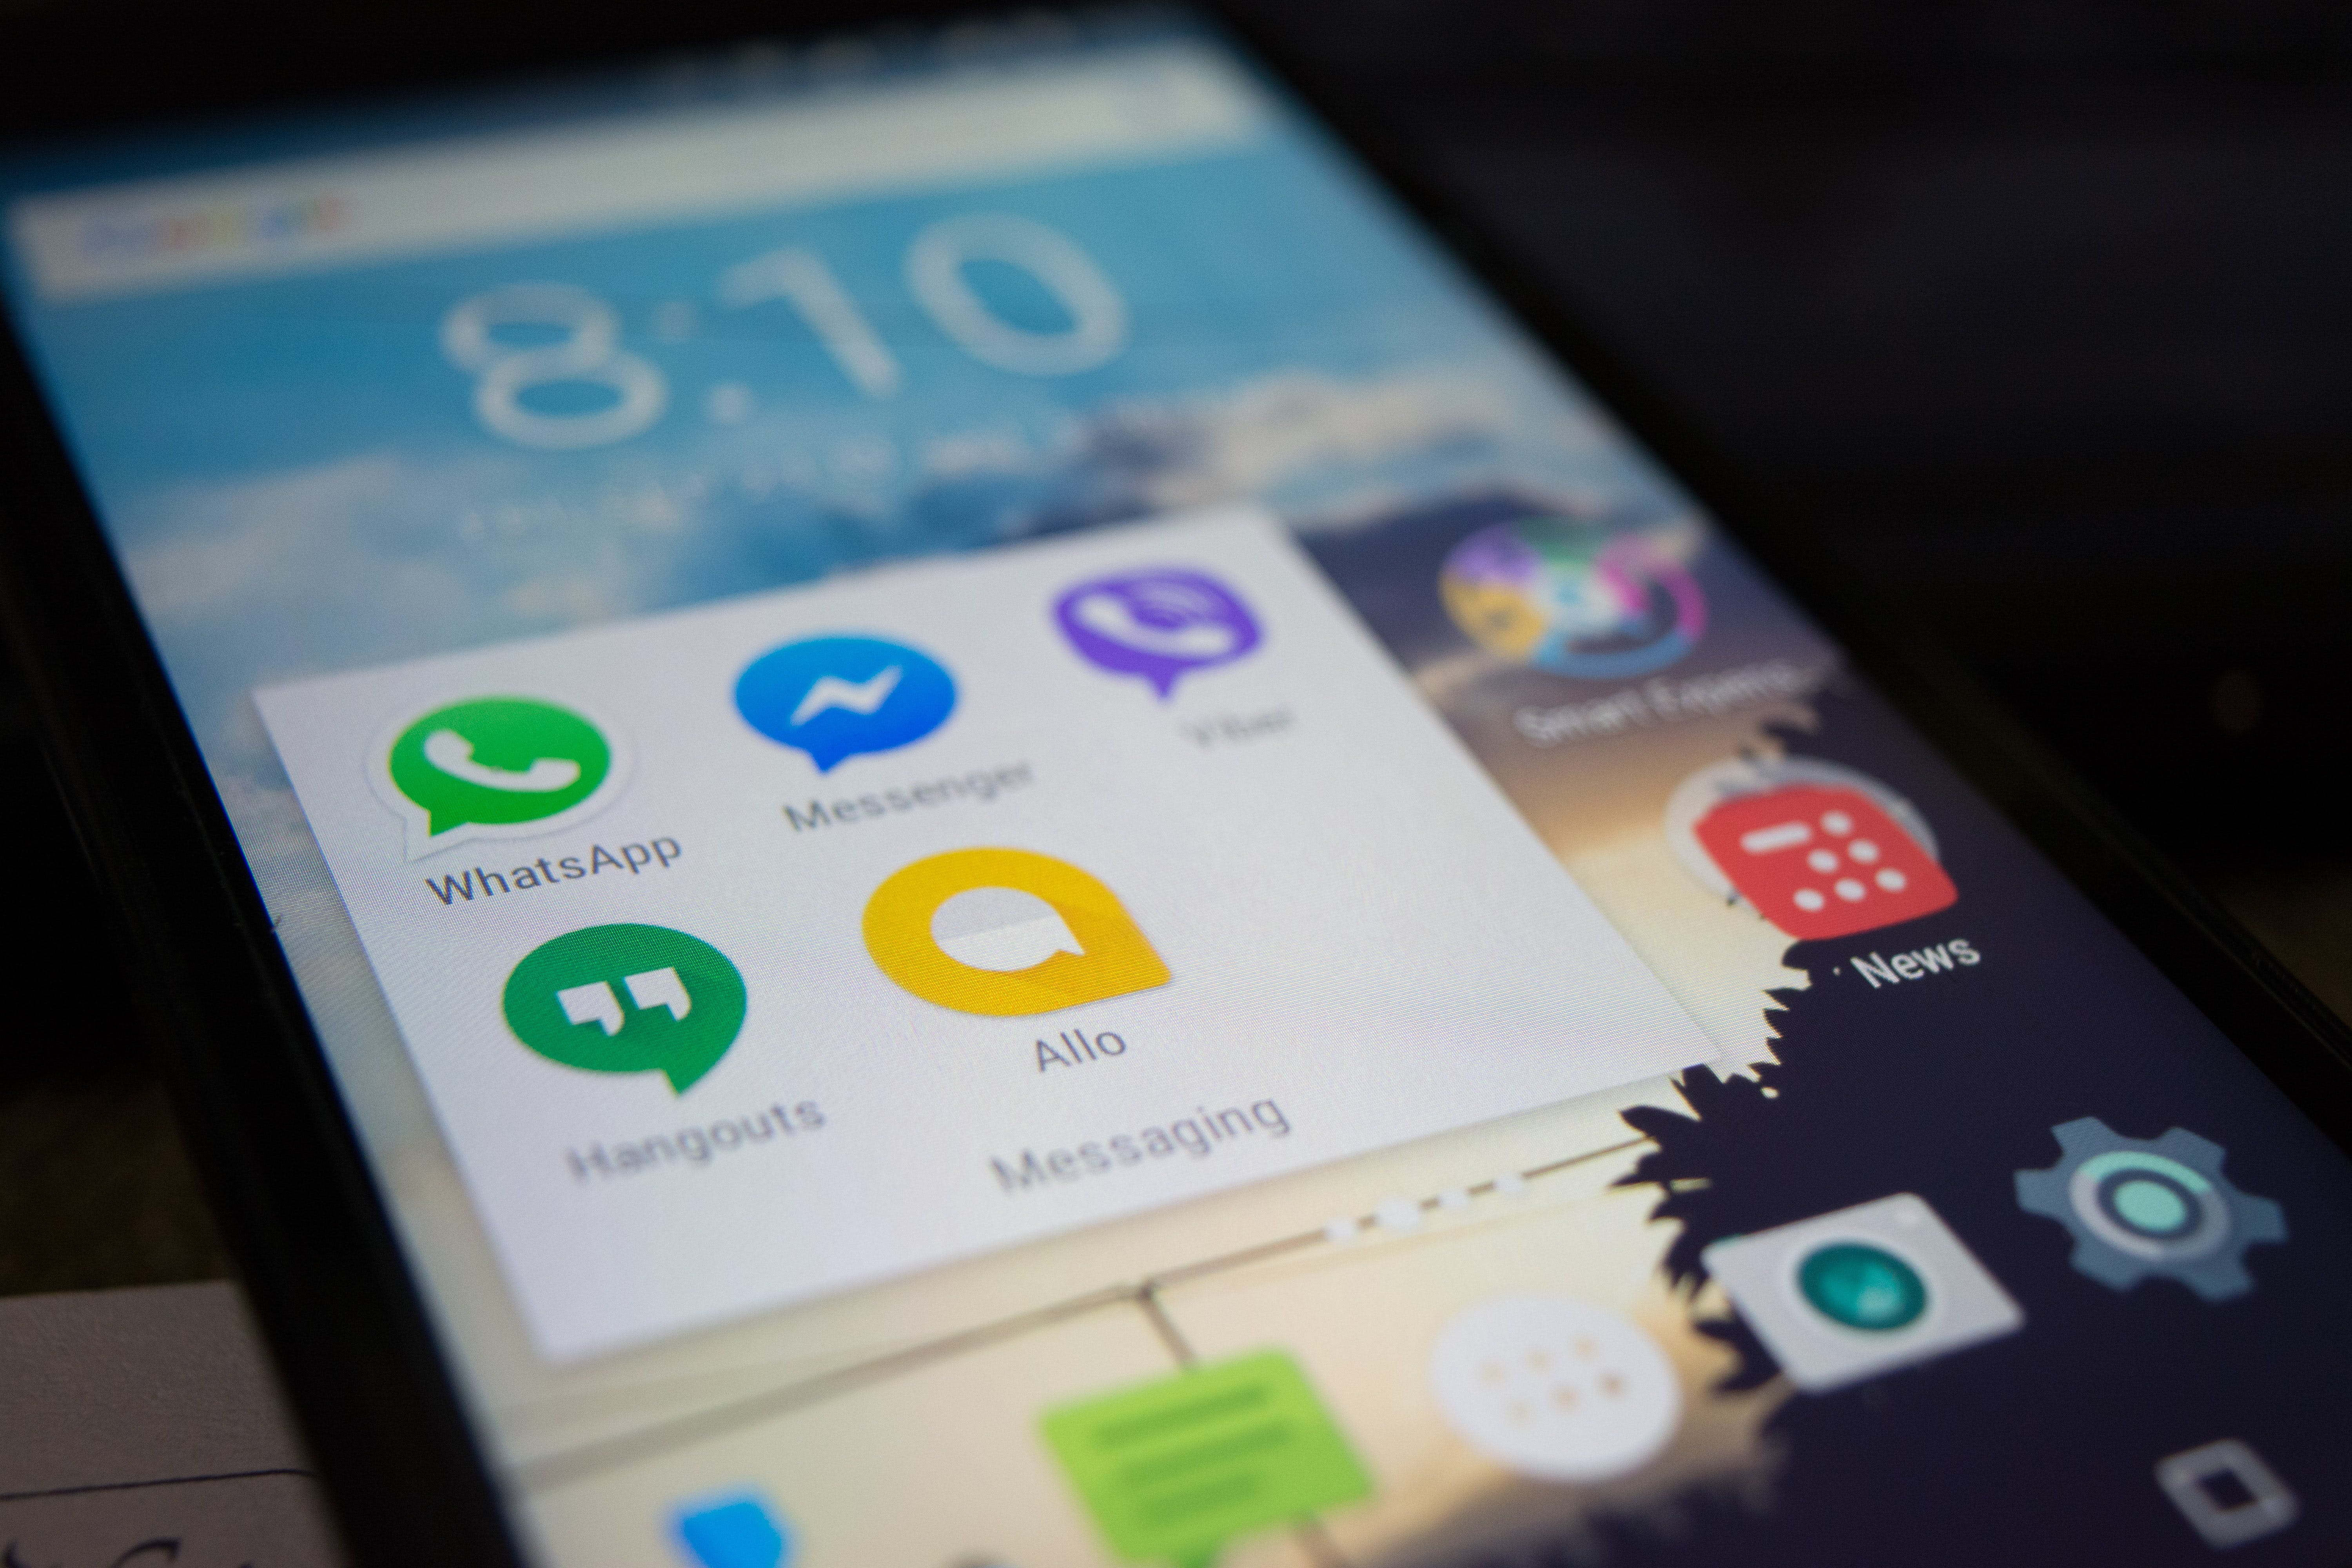 Discover How to Read Deleted/Unsent Messages on WhatsApp